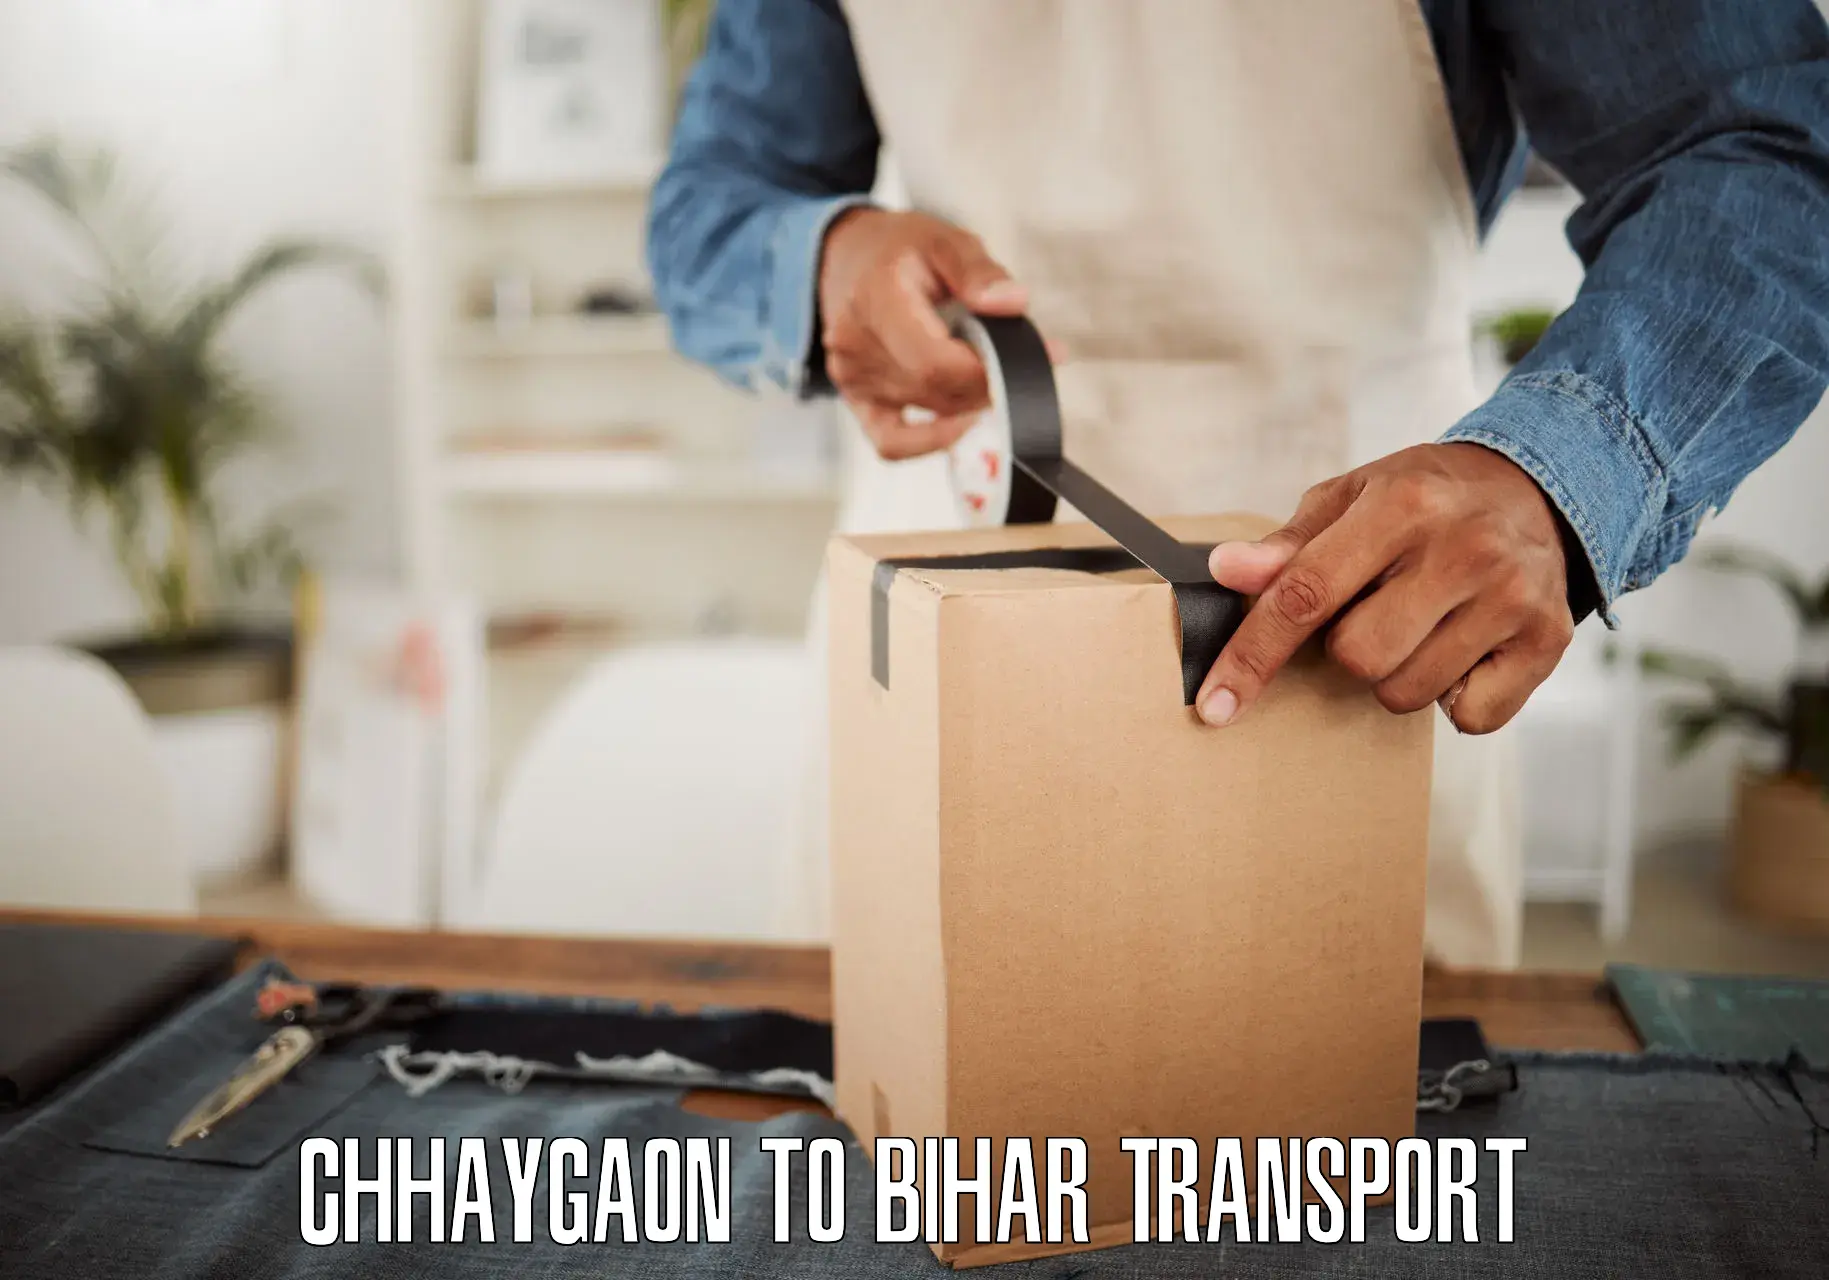 Truck transport companies in India Chhaygaon to Punsia